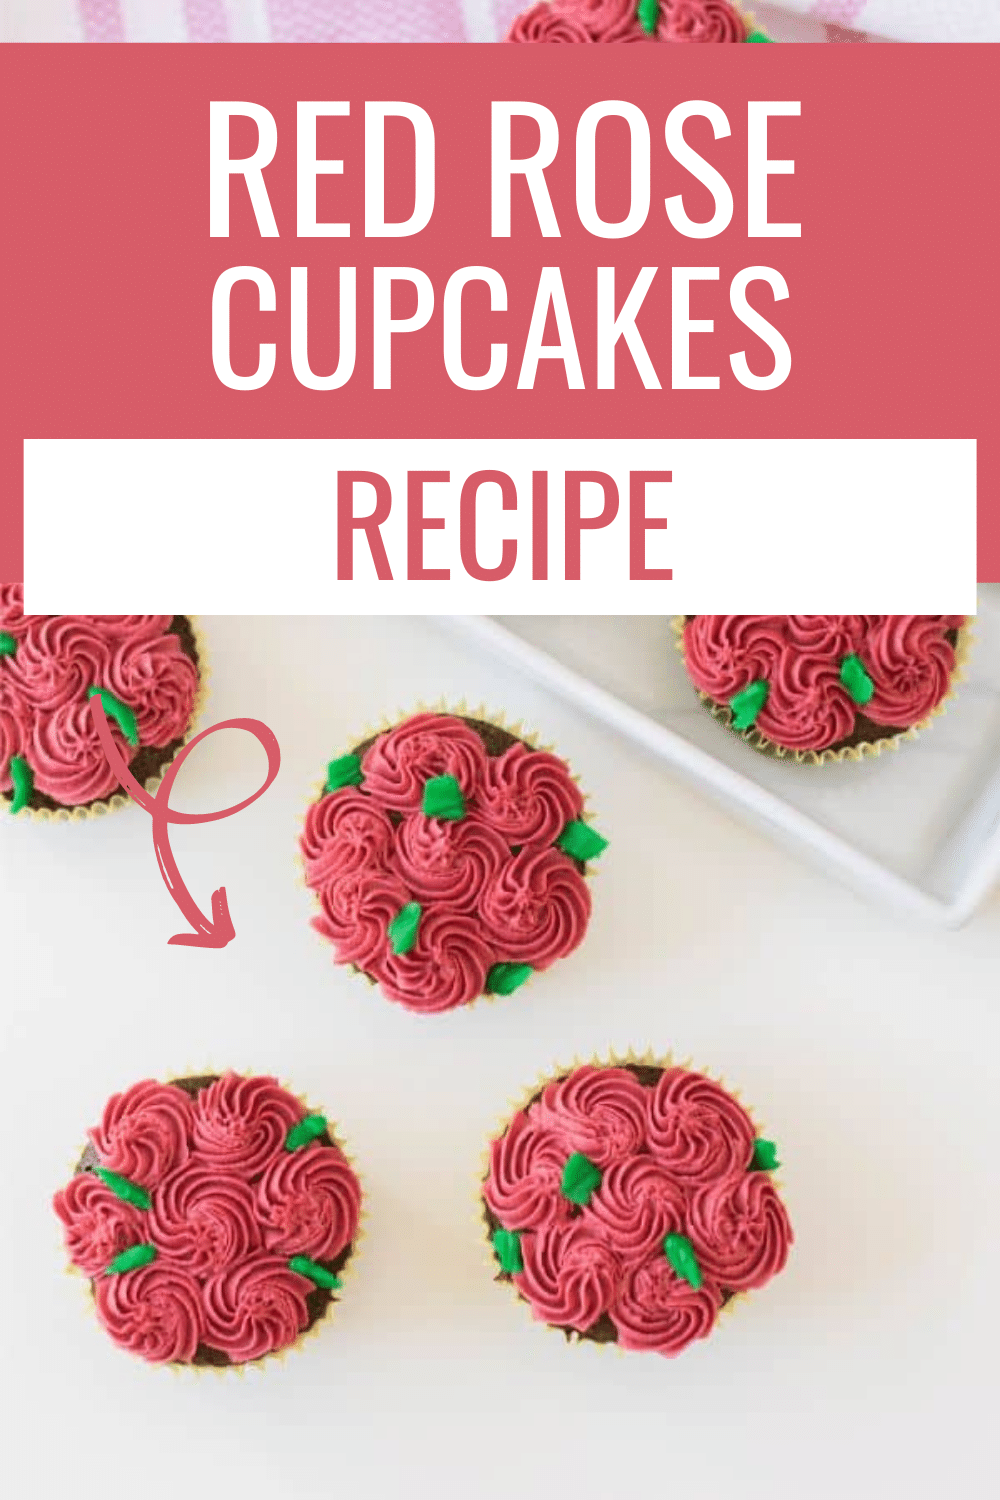 Red Rose Cupcakes are wonderful to serve for Valentine's Day or really anytime romance is the theme. They're also a nice treat for chocolate lovers who also happen to love roses. #cupcakes #rose #valentinesday #romance via @wondermomwannab